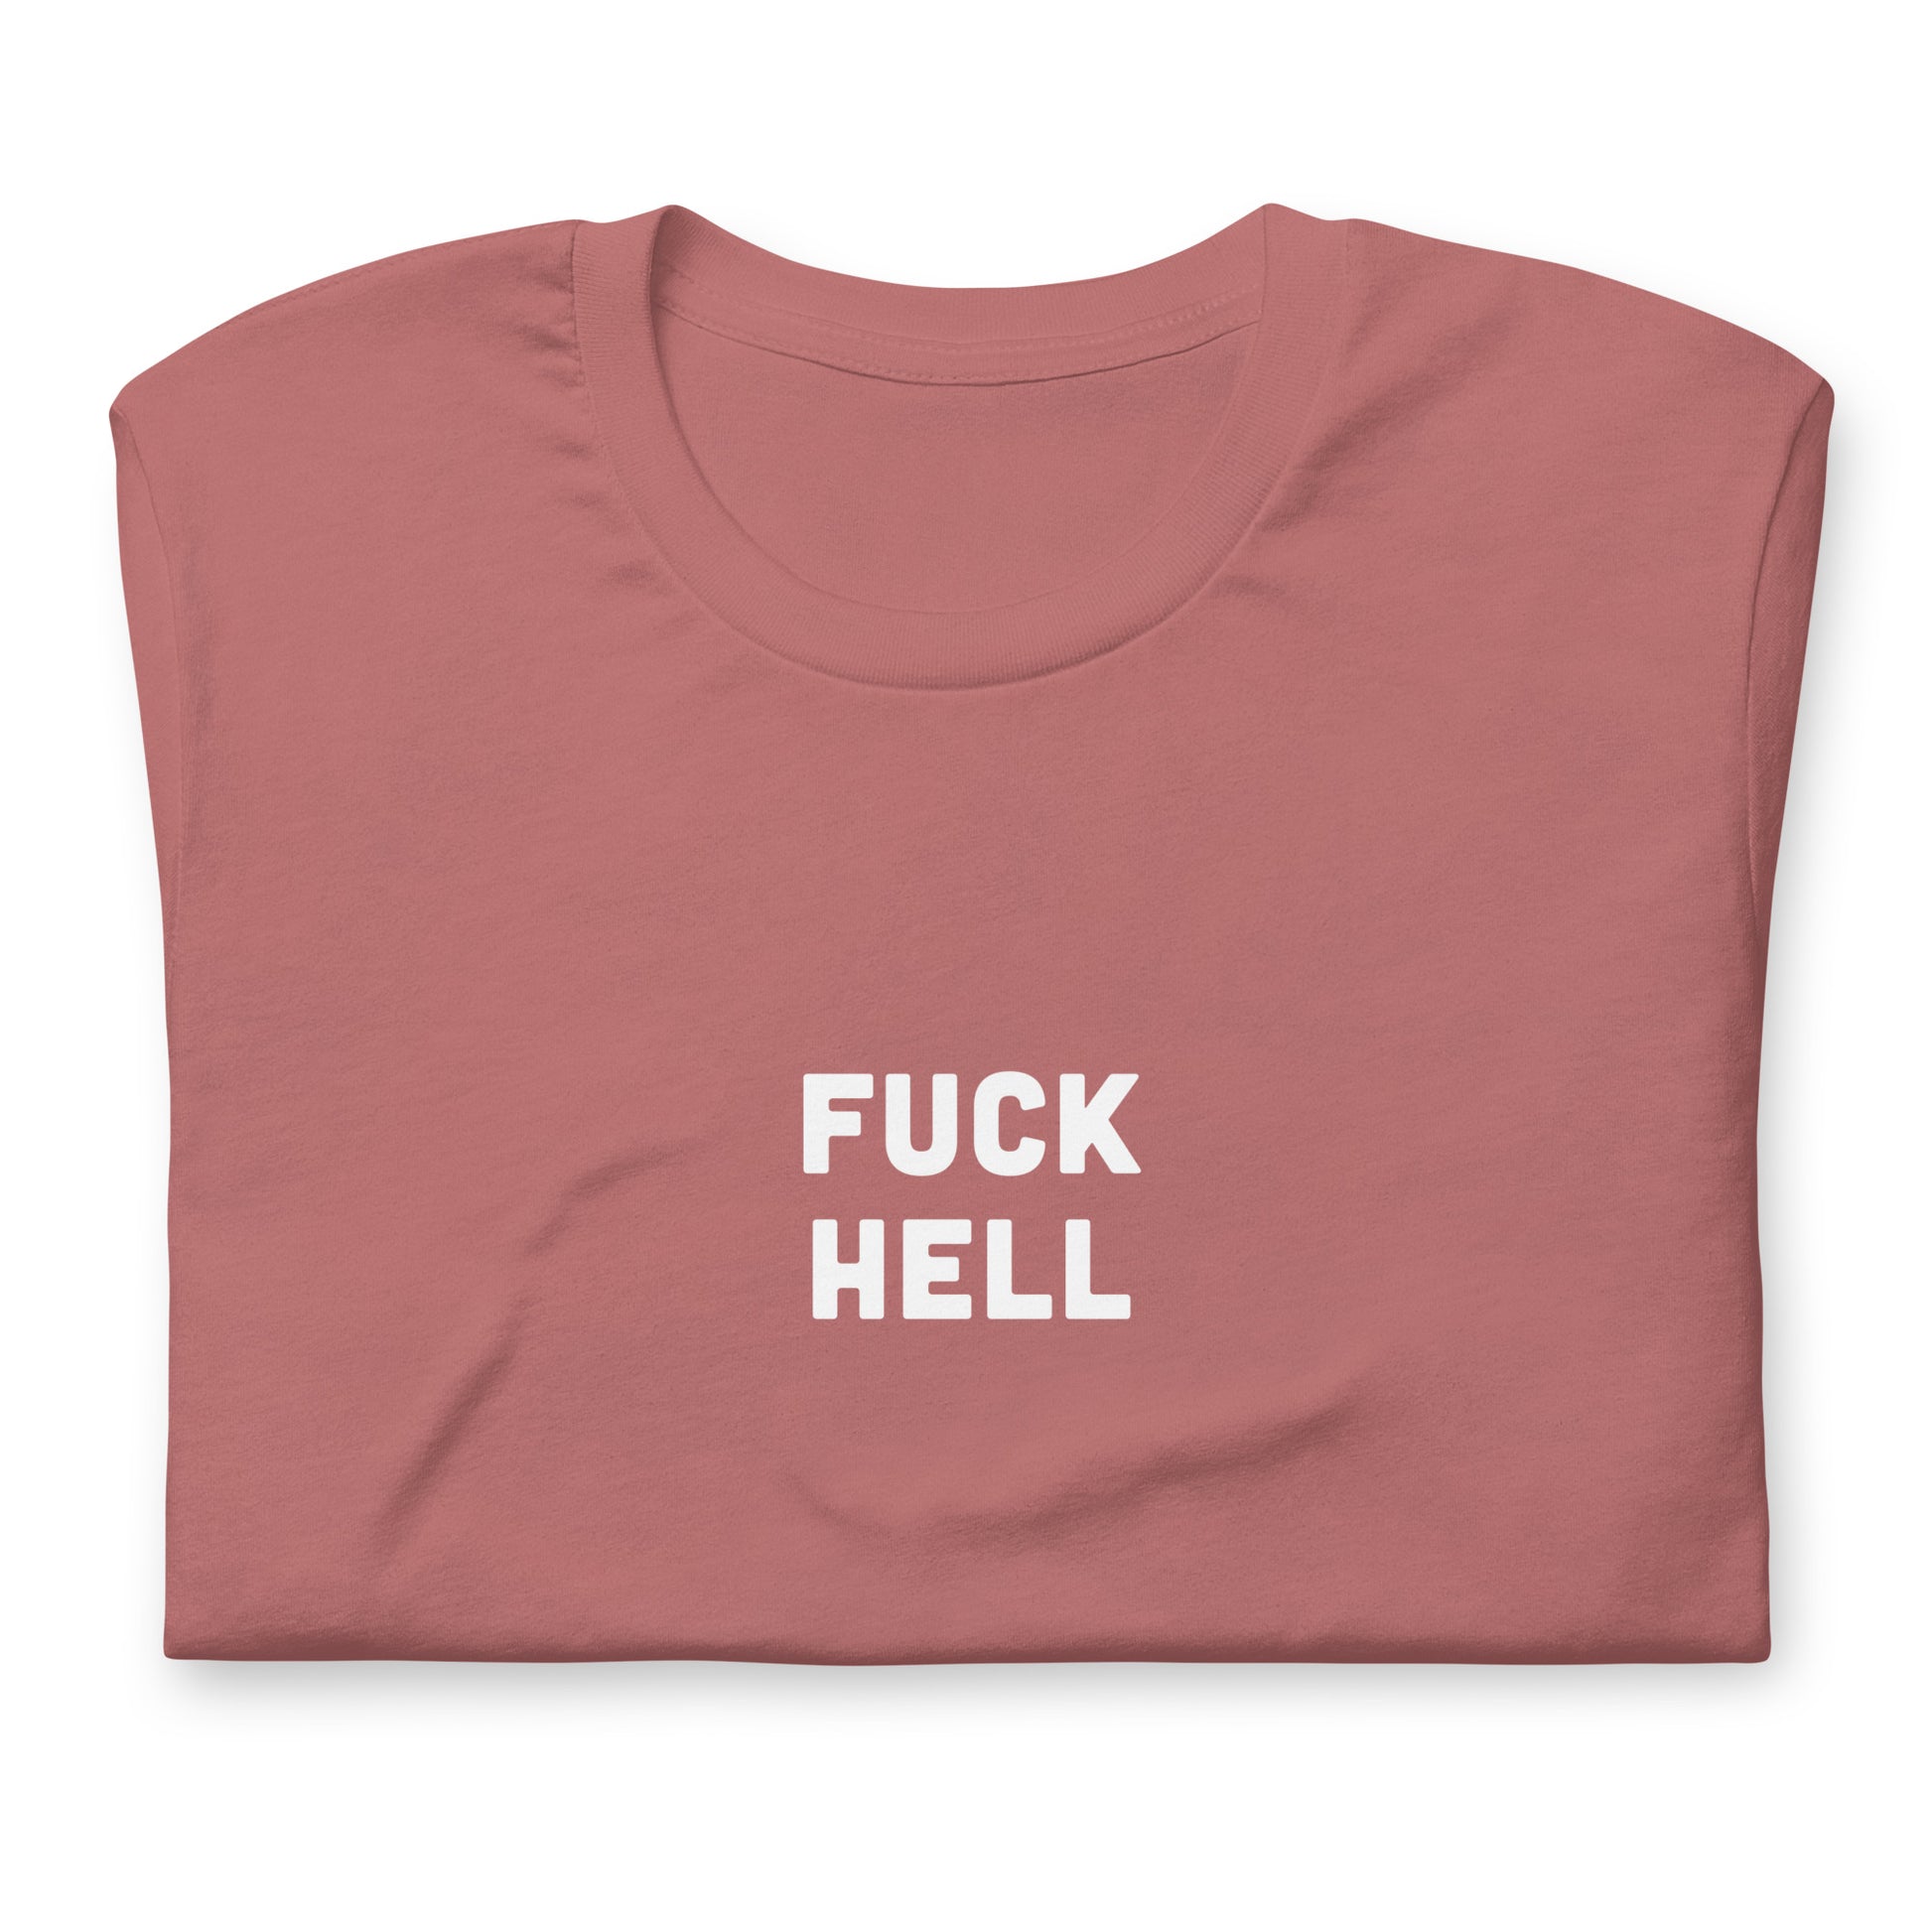 Fuck Hell T-Shirt Size XL Color Navy